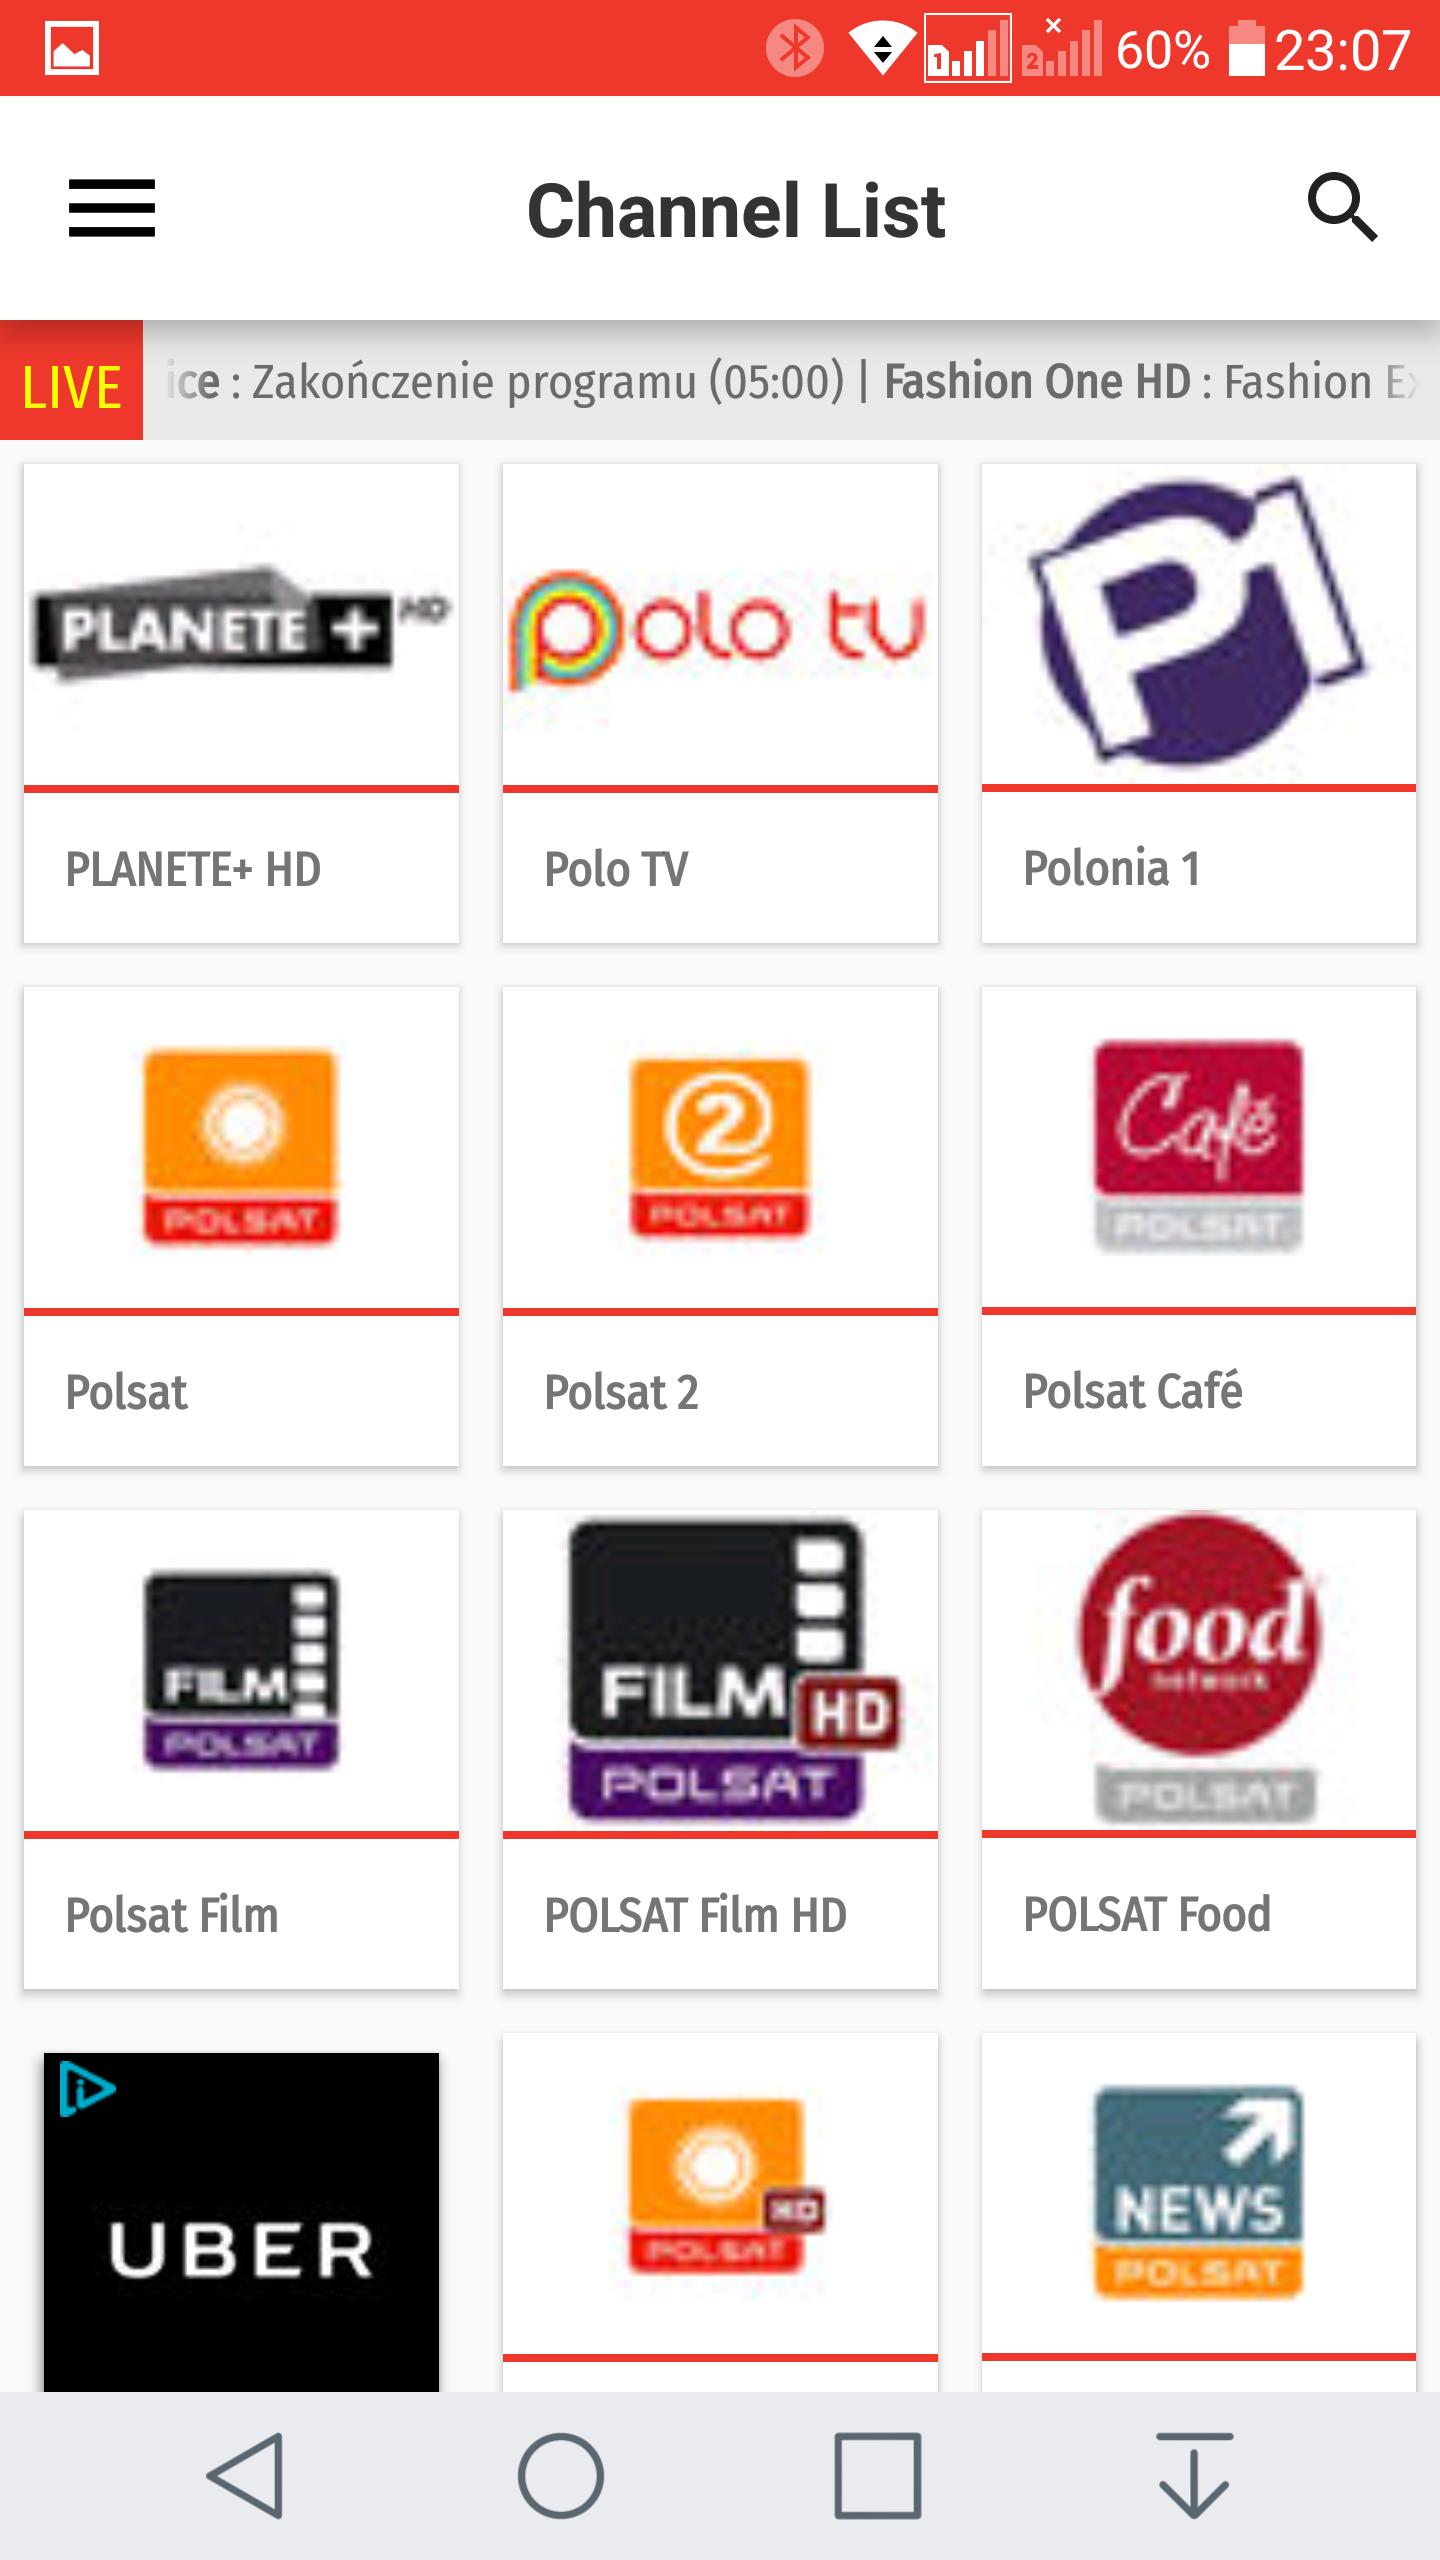 Poland Free TV Electronic Program Guide for Android - APK Download